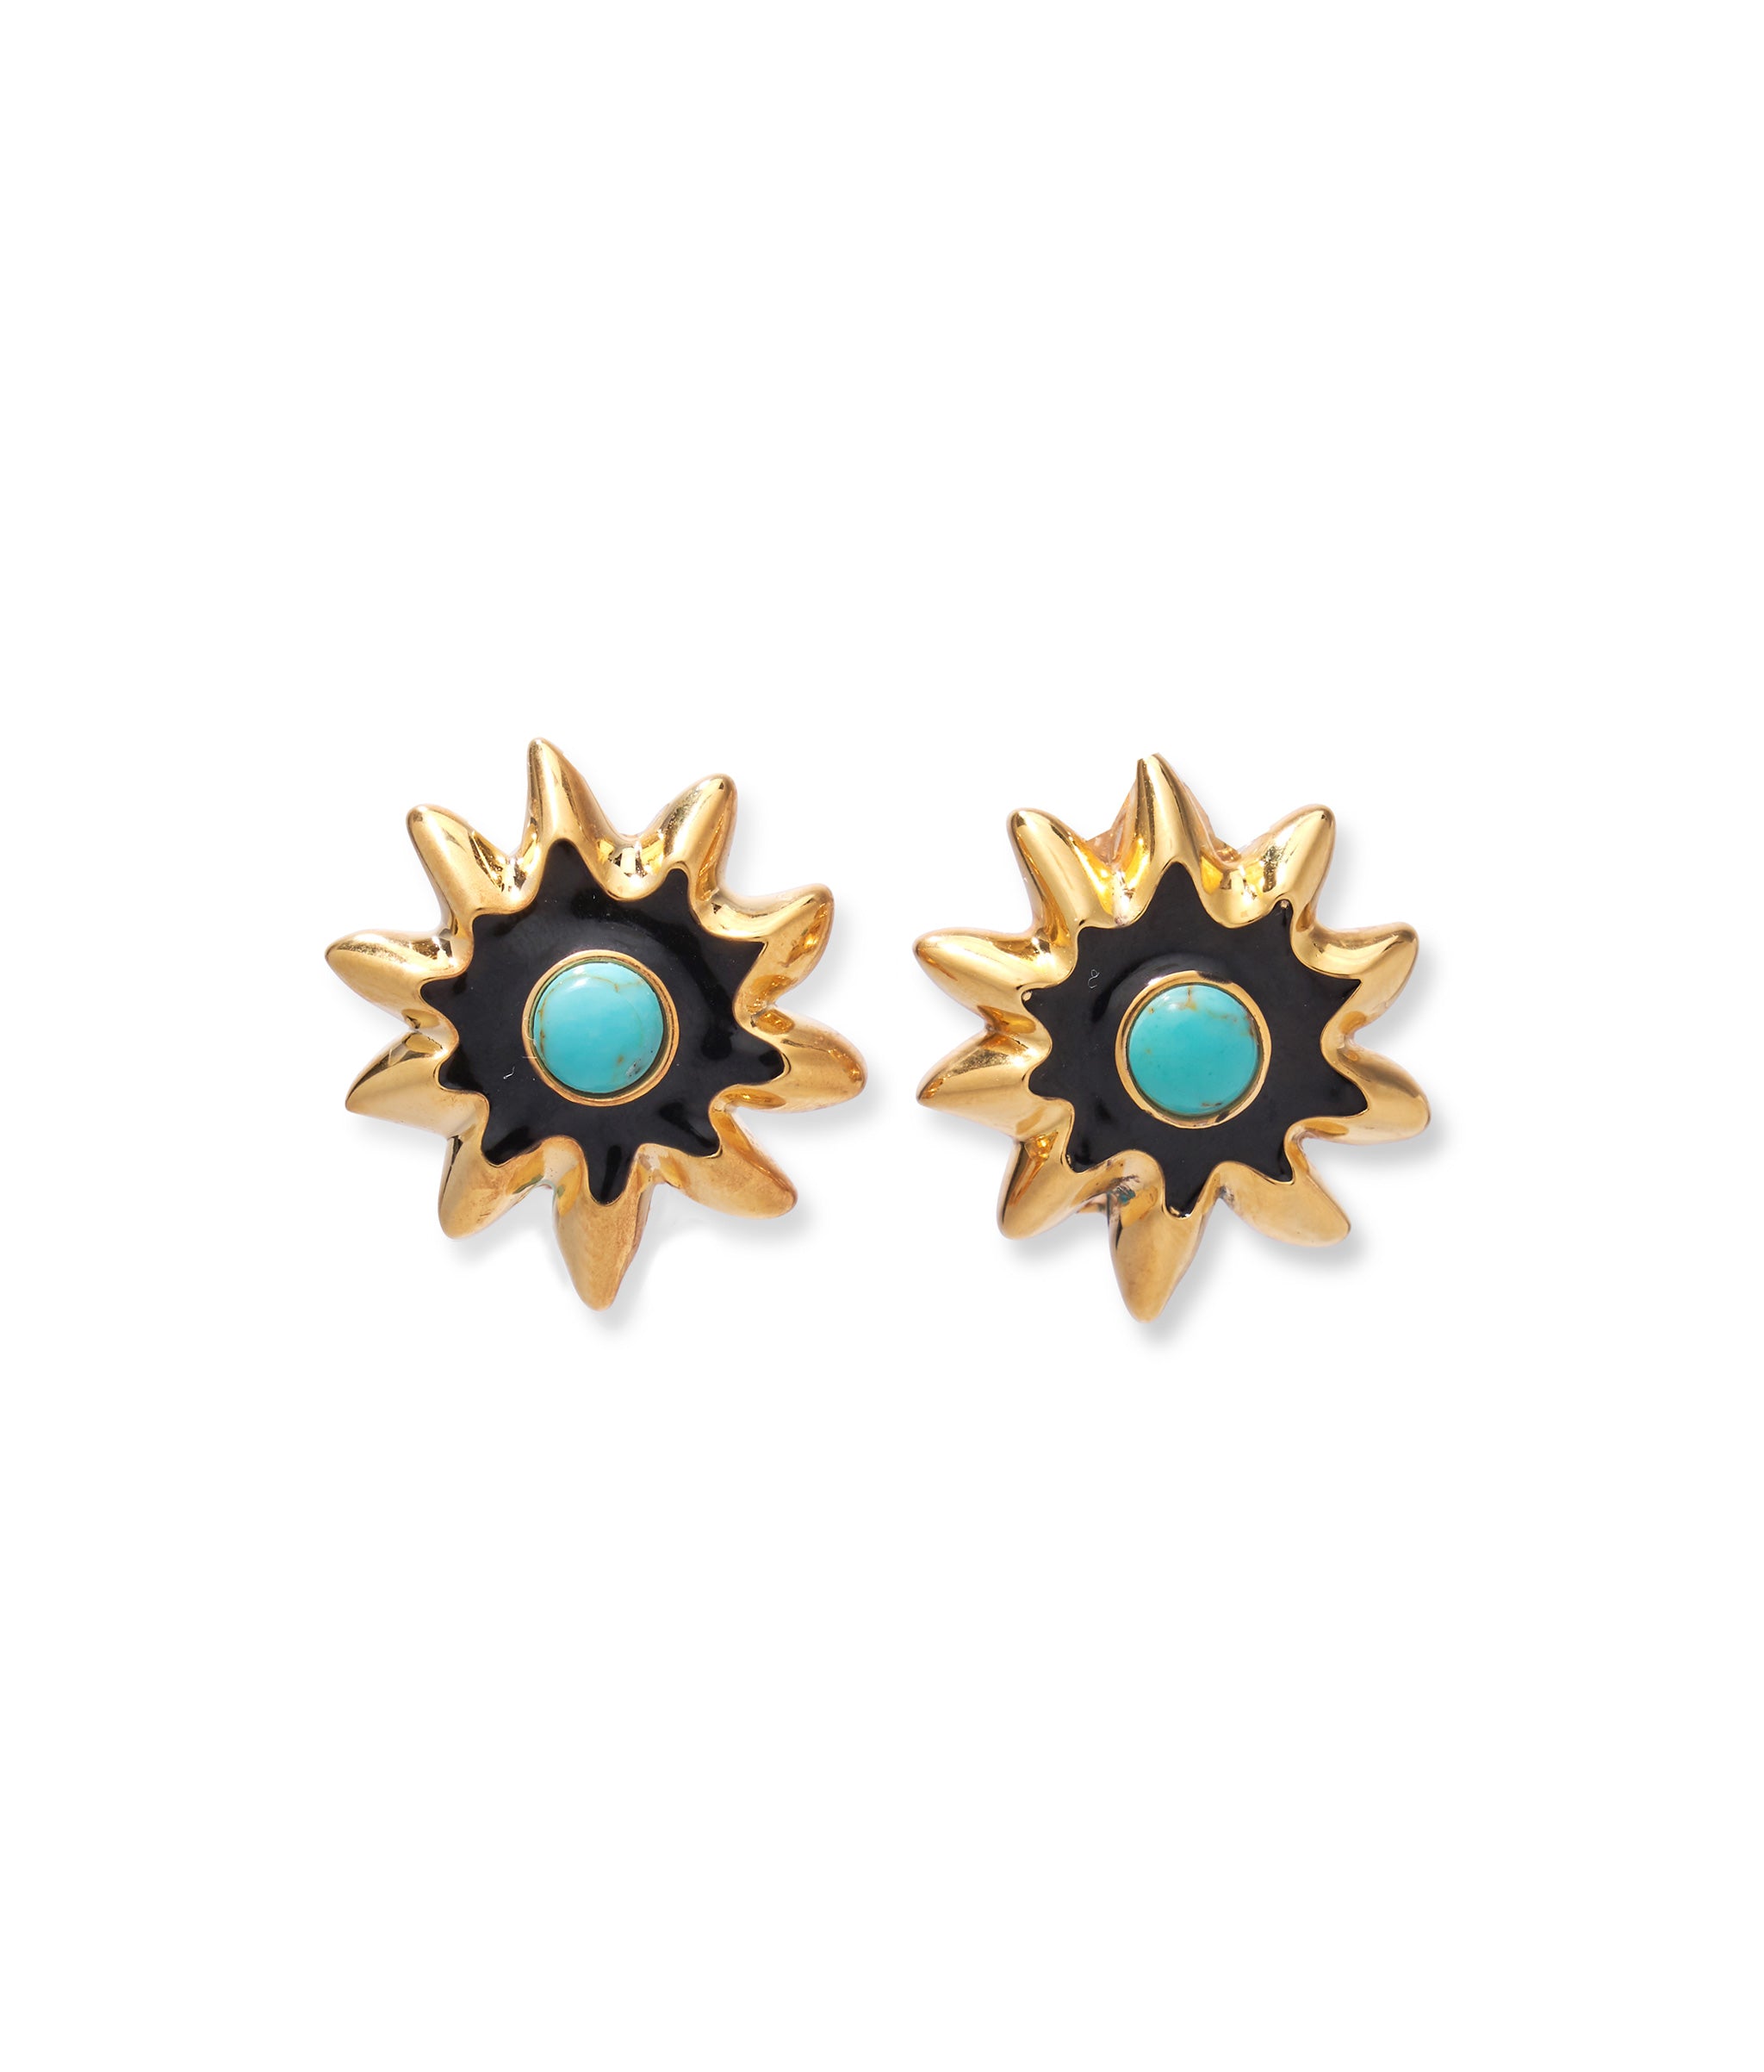 Helios Stud Earrings. Gold-plated brass and black enamel starbust studs with turquoise cabochons.